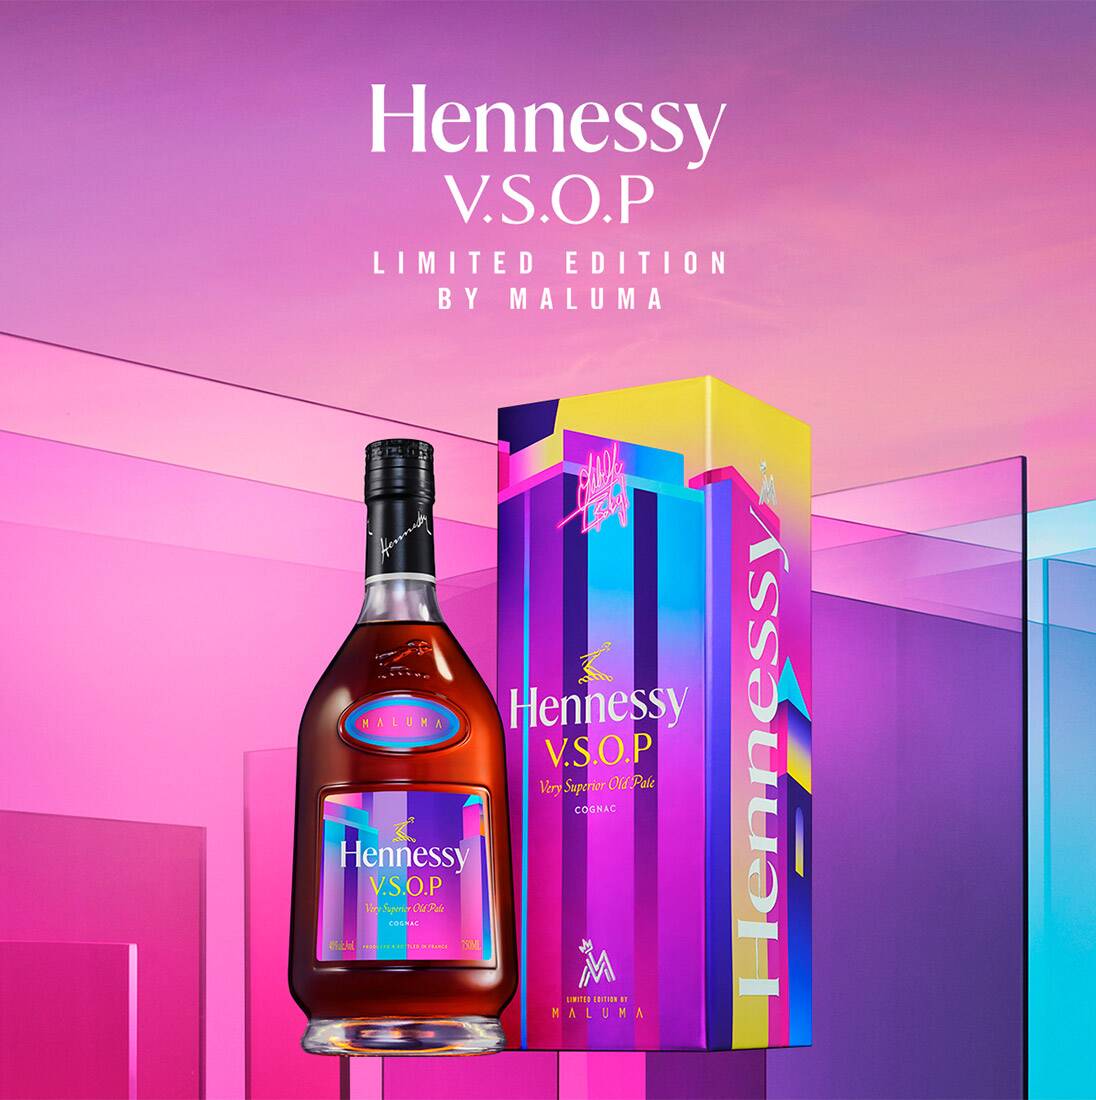 Hennessy V.S.O.P releases limited edition designed by global Latin